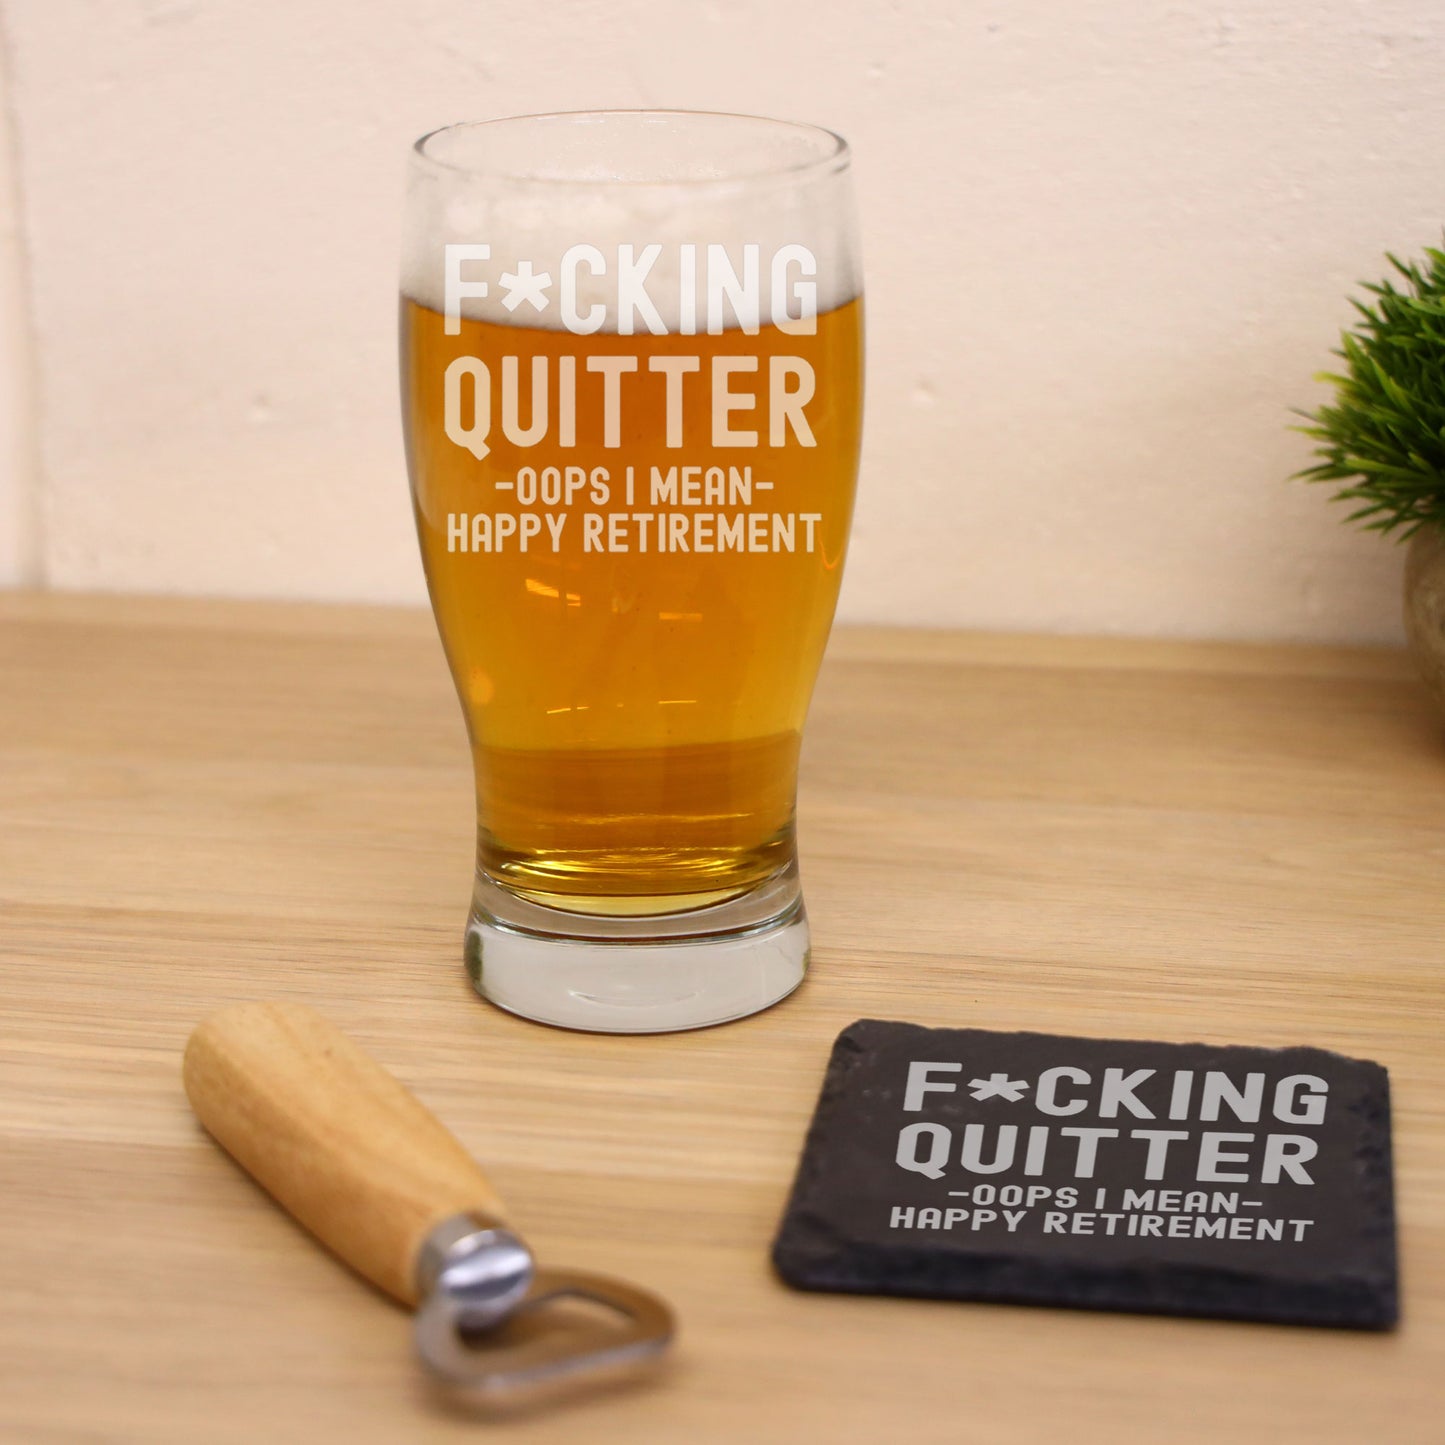 Engraved "F*cking Quitter, Oops I mean Happy Retirement" Beer Glass and/or Coaster Novelty Gift  - Always Looking Good - Glass & Square Coaster Set  